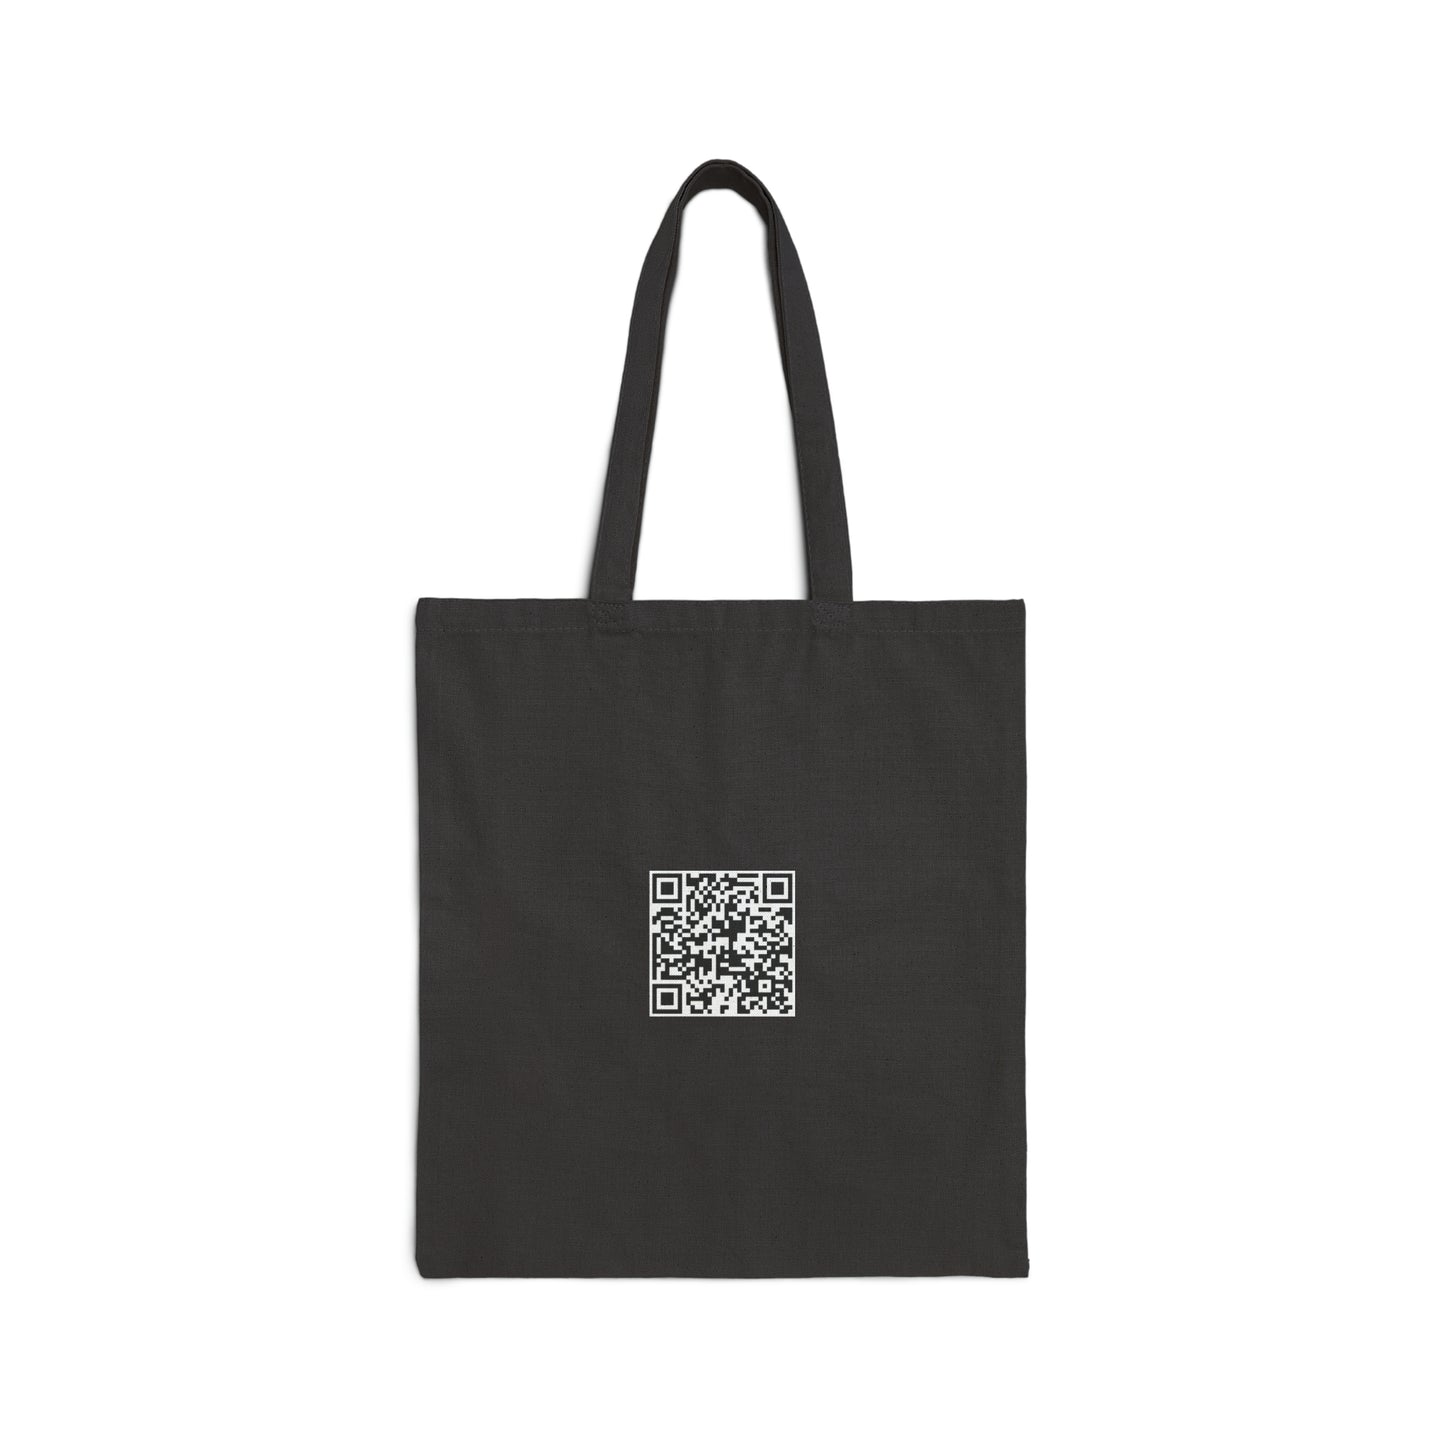 Welcome To Somerville Grange - Cotton Canvas Tote Bag